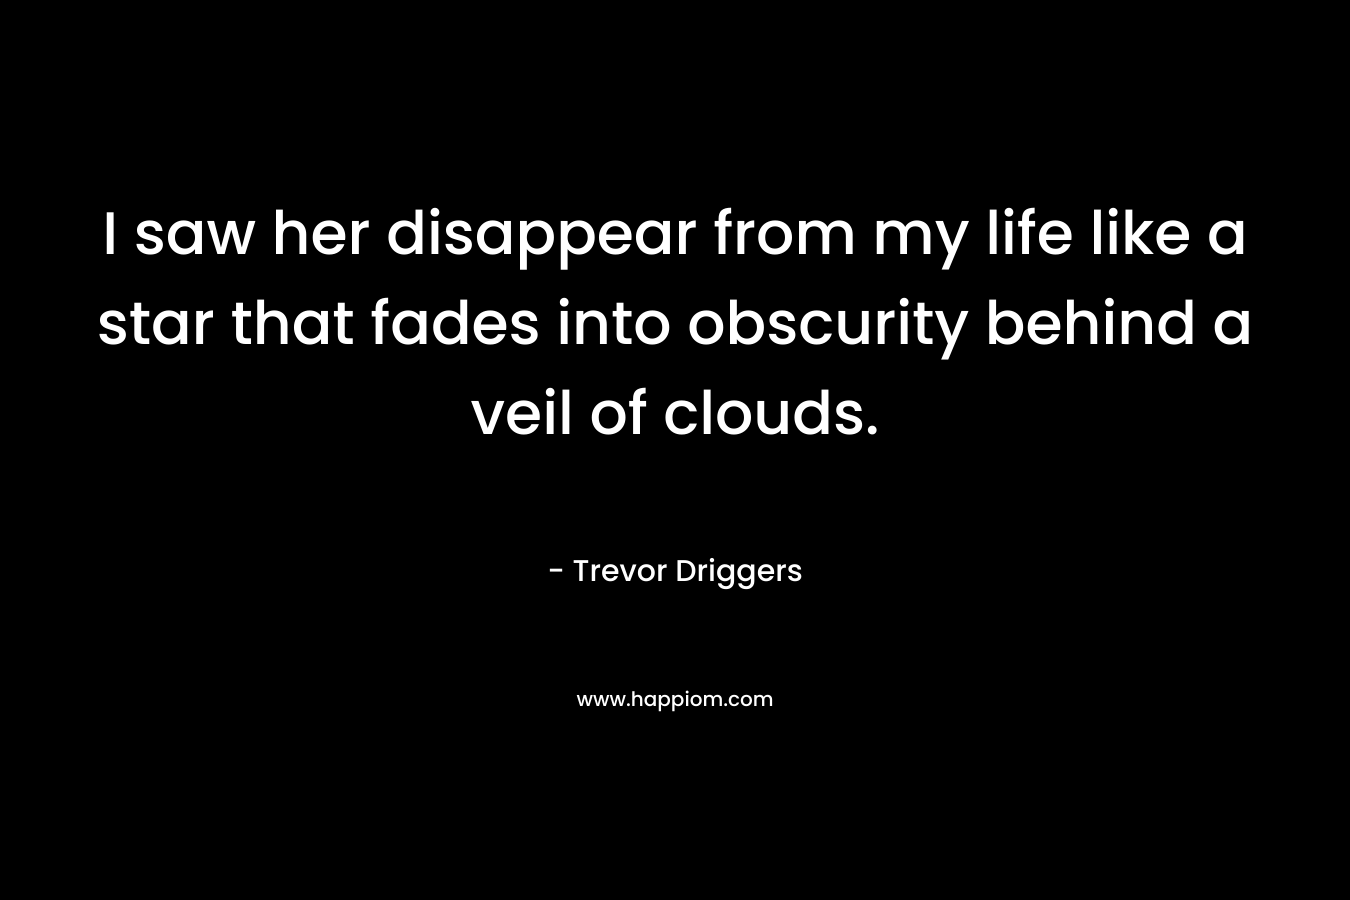 I saw her disappear from my life like a star that fades into obscurity behind a veil of clouds. – Trevor Driggers